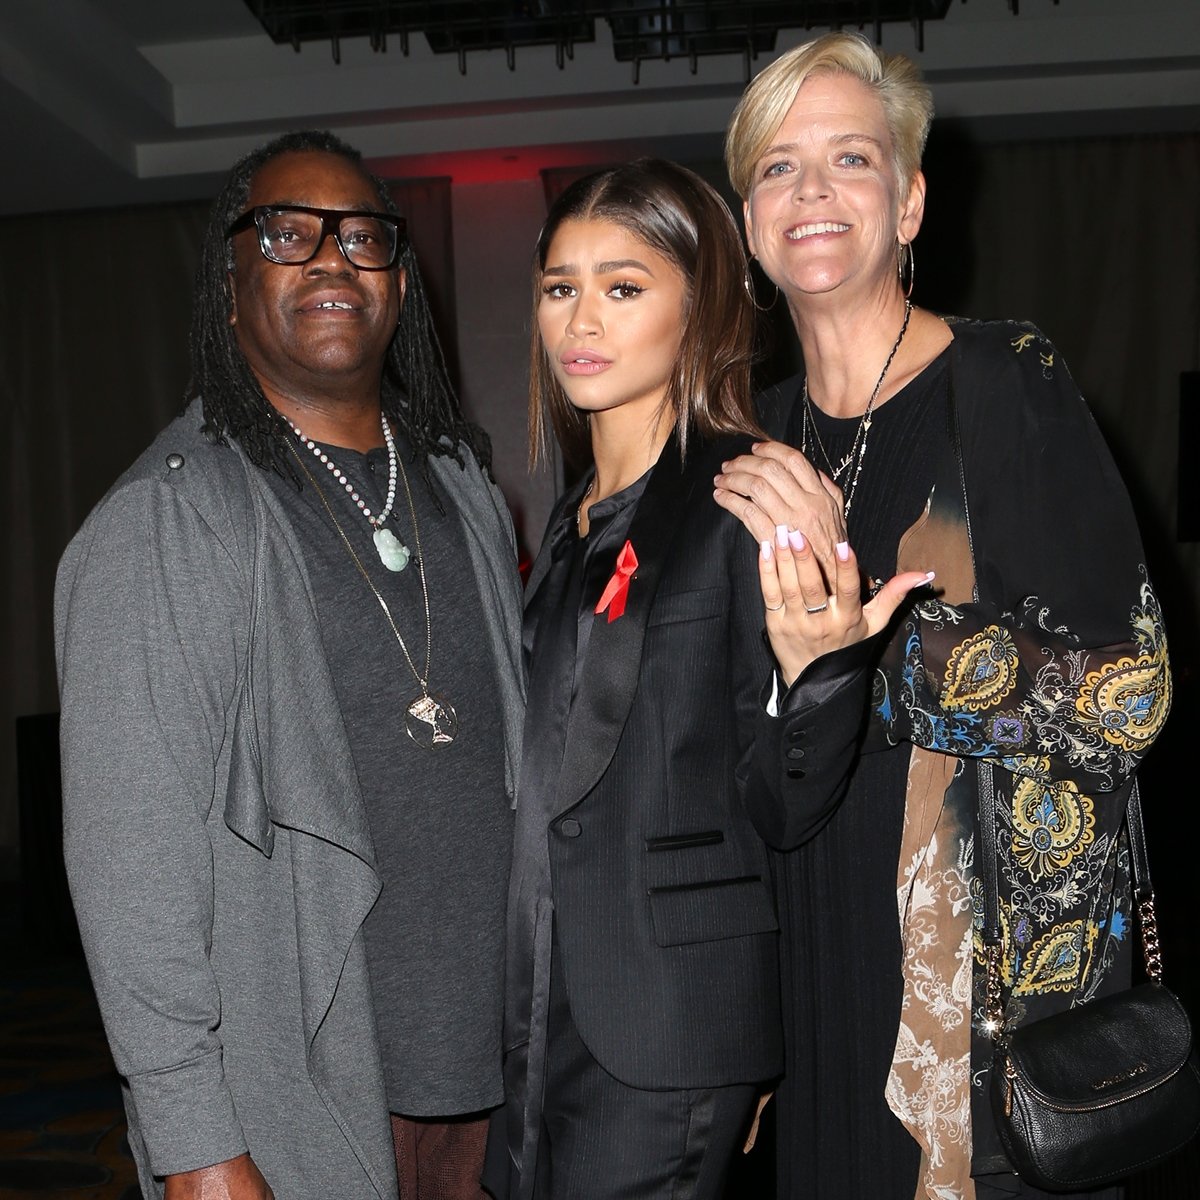 Kazembe Ajamu Coleman with his daughter Zendaya and ex-wife Claire Stoermer 